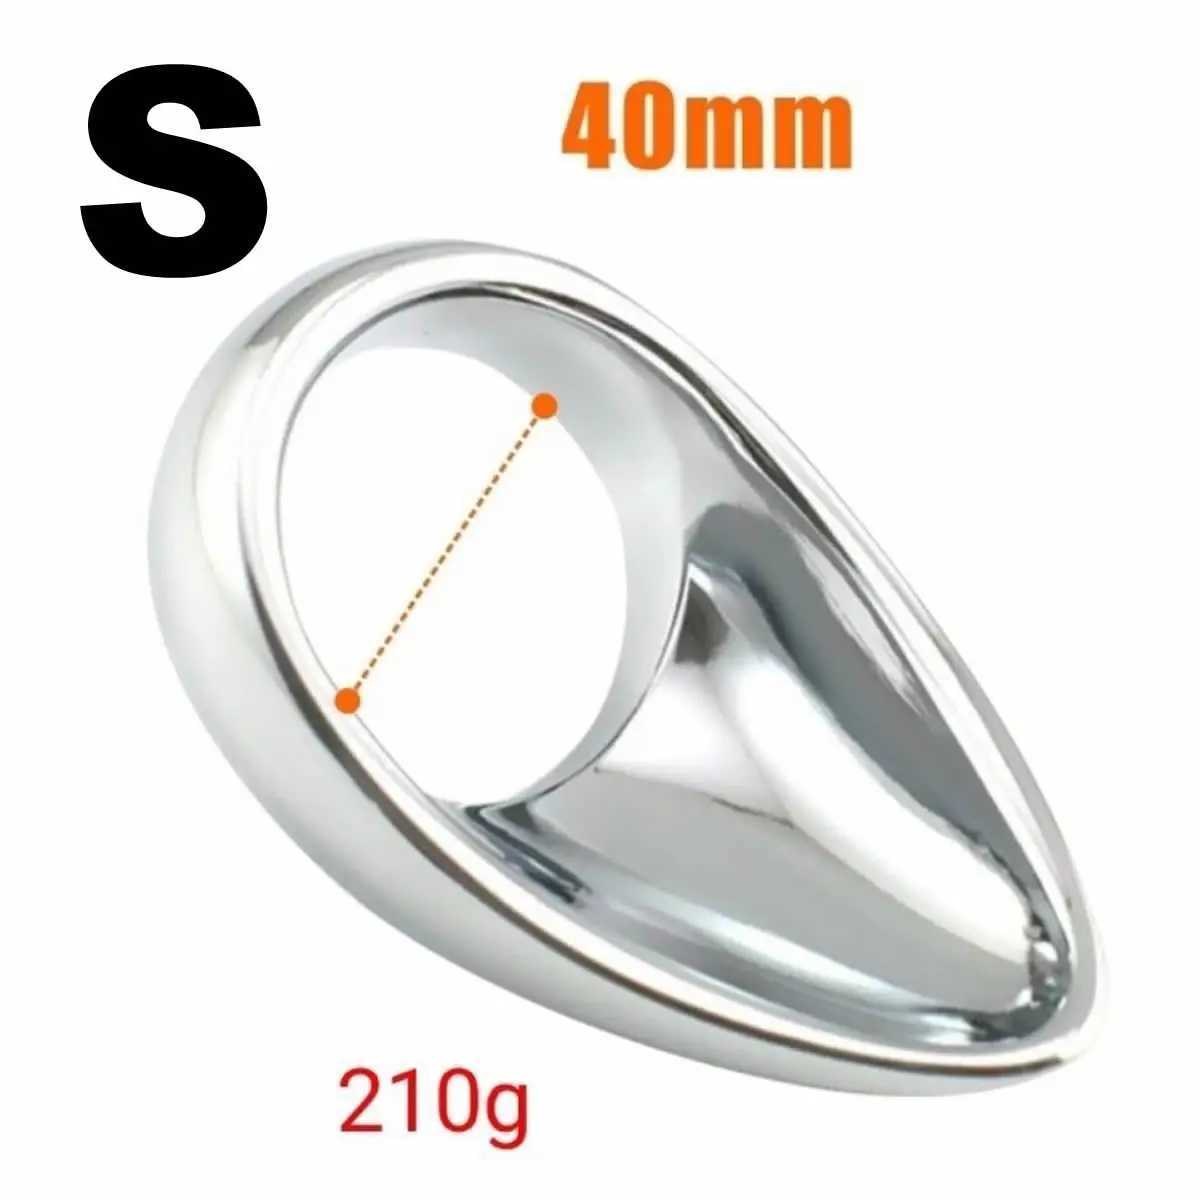 Nxy Cockrings Metal Tears Cock Cock Ring Thong Shape Penis Dildo Cage Ball Sex Toys for Men Adult Product TeardropBDSMステンレス鋼240427